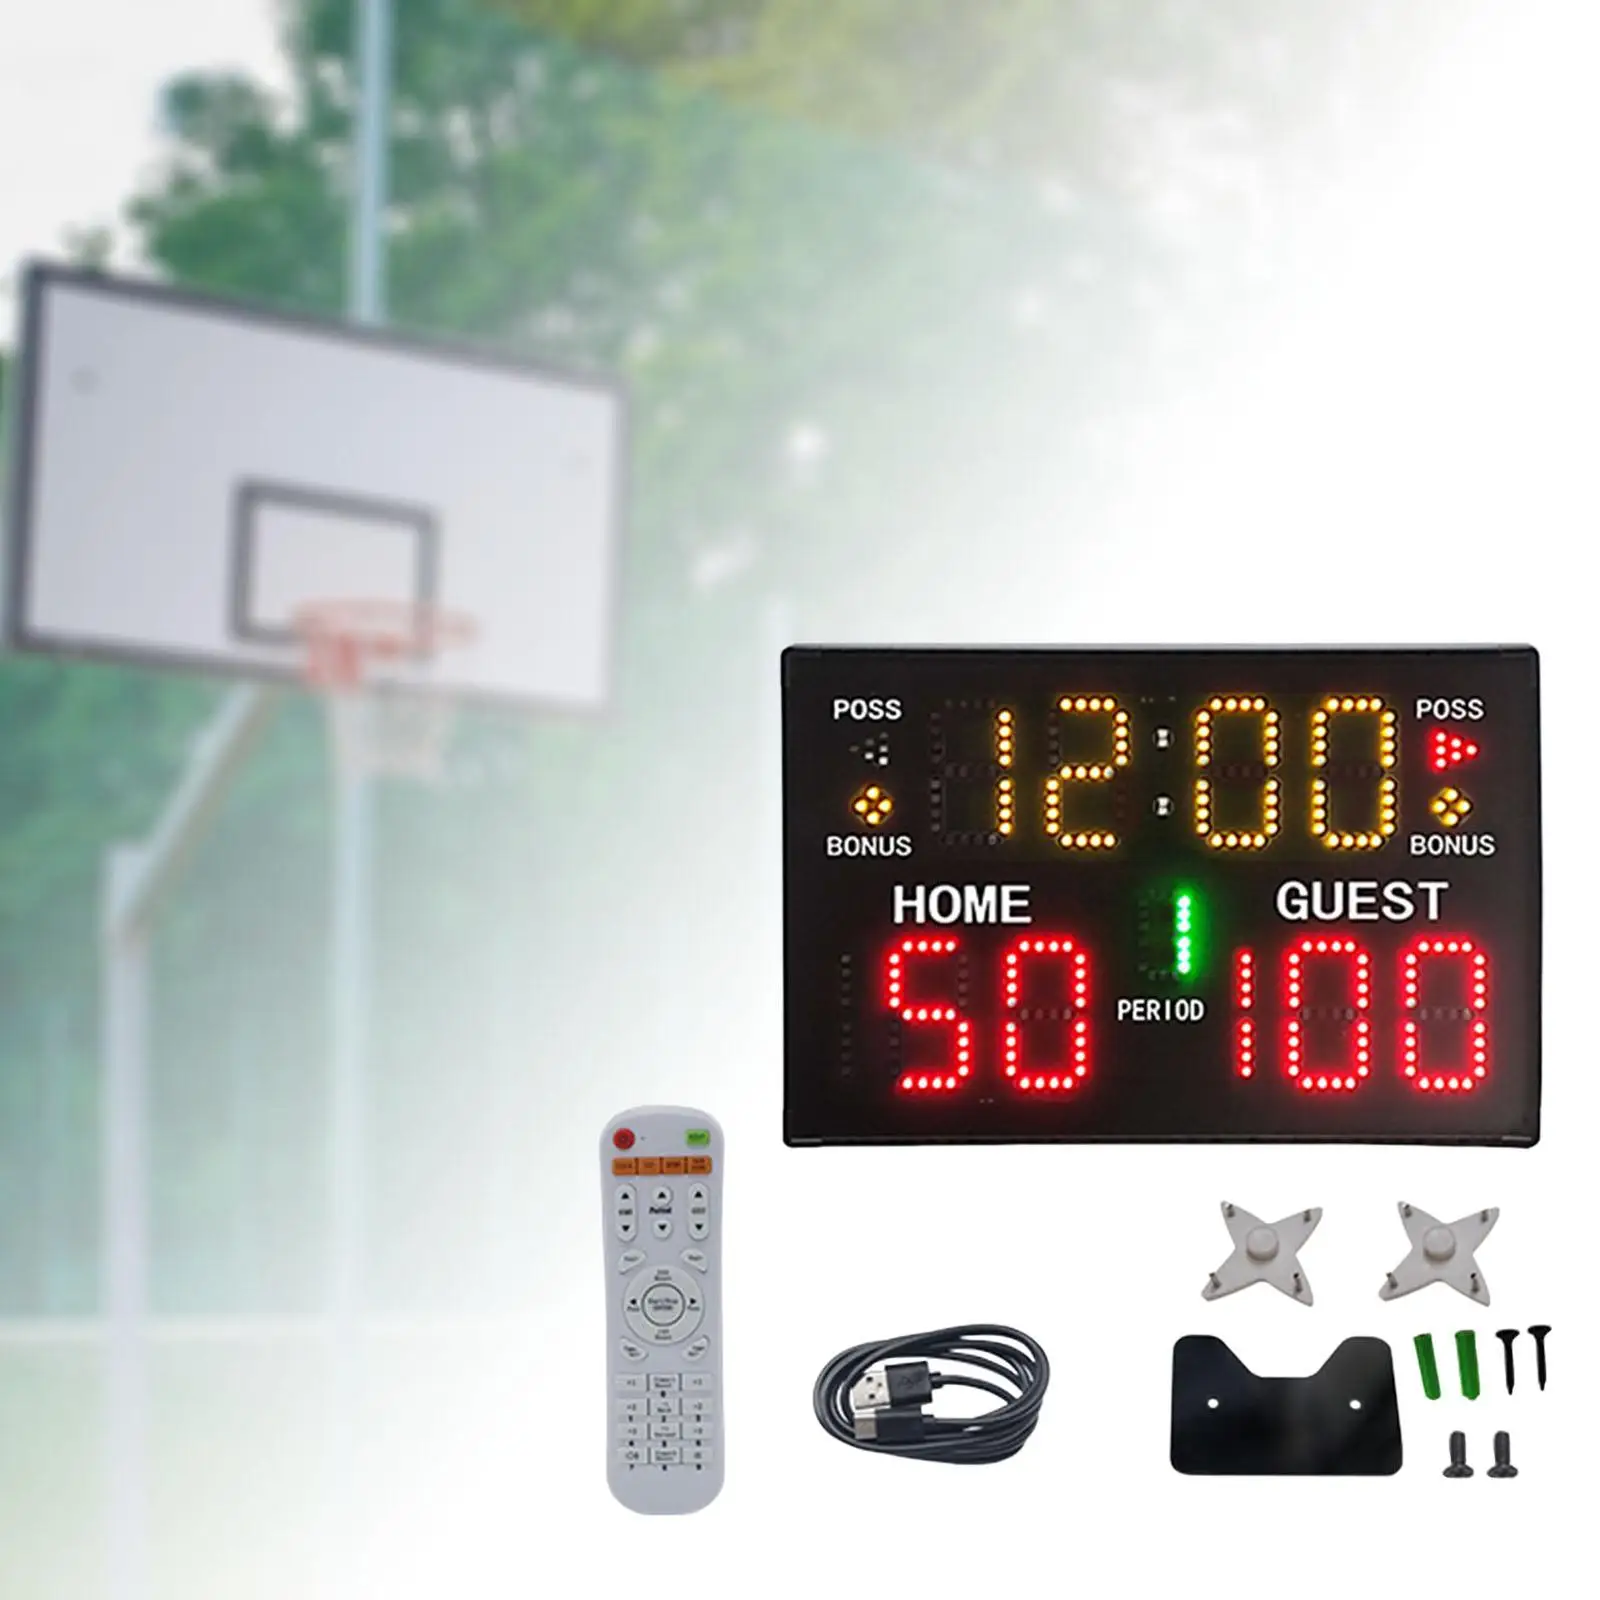 Digital Scoreboard Wall Hanging Portable with Remote Score Keeper Electronic Scoreboard for Volleyball Outdoor Tennis Boxing